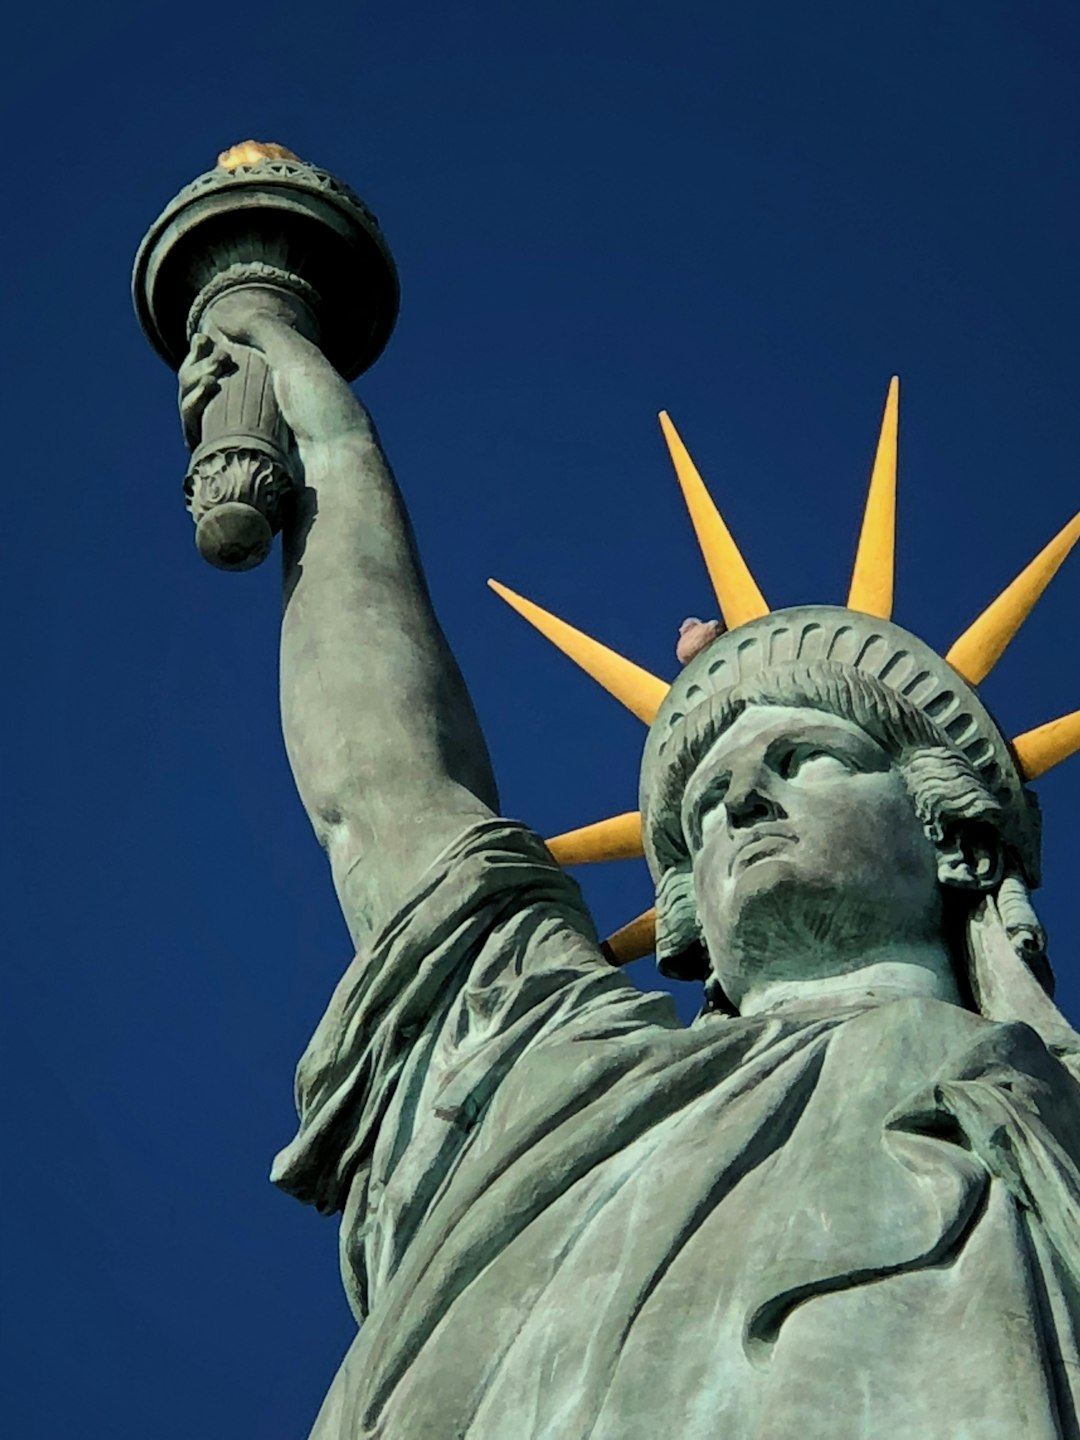 travelers stories about Landmark in Statue of Liberty, France